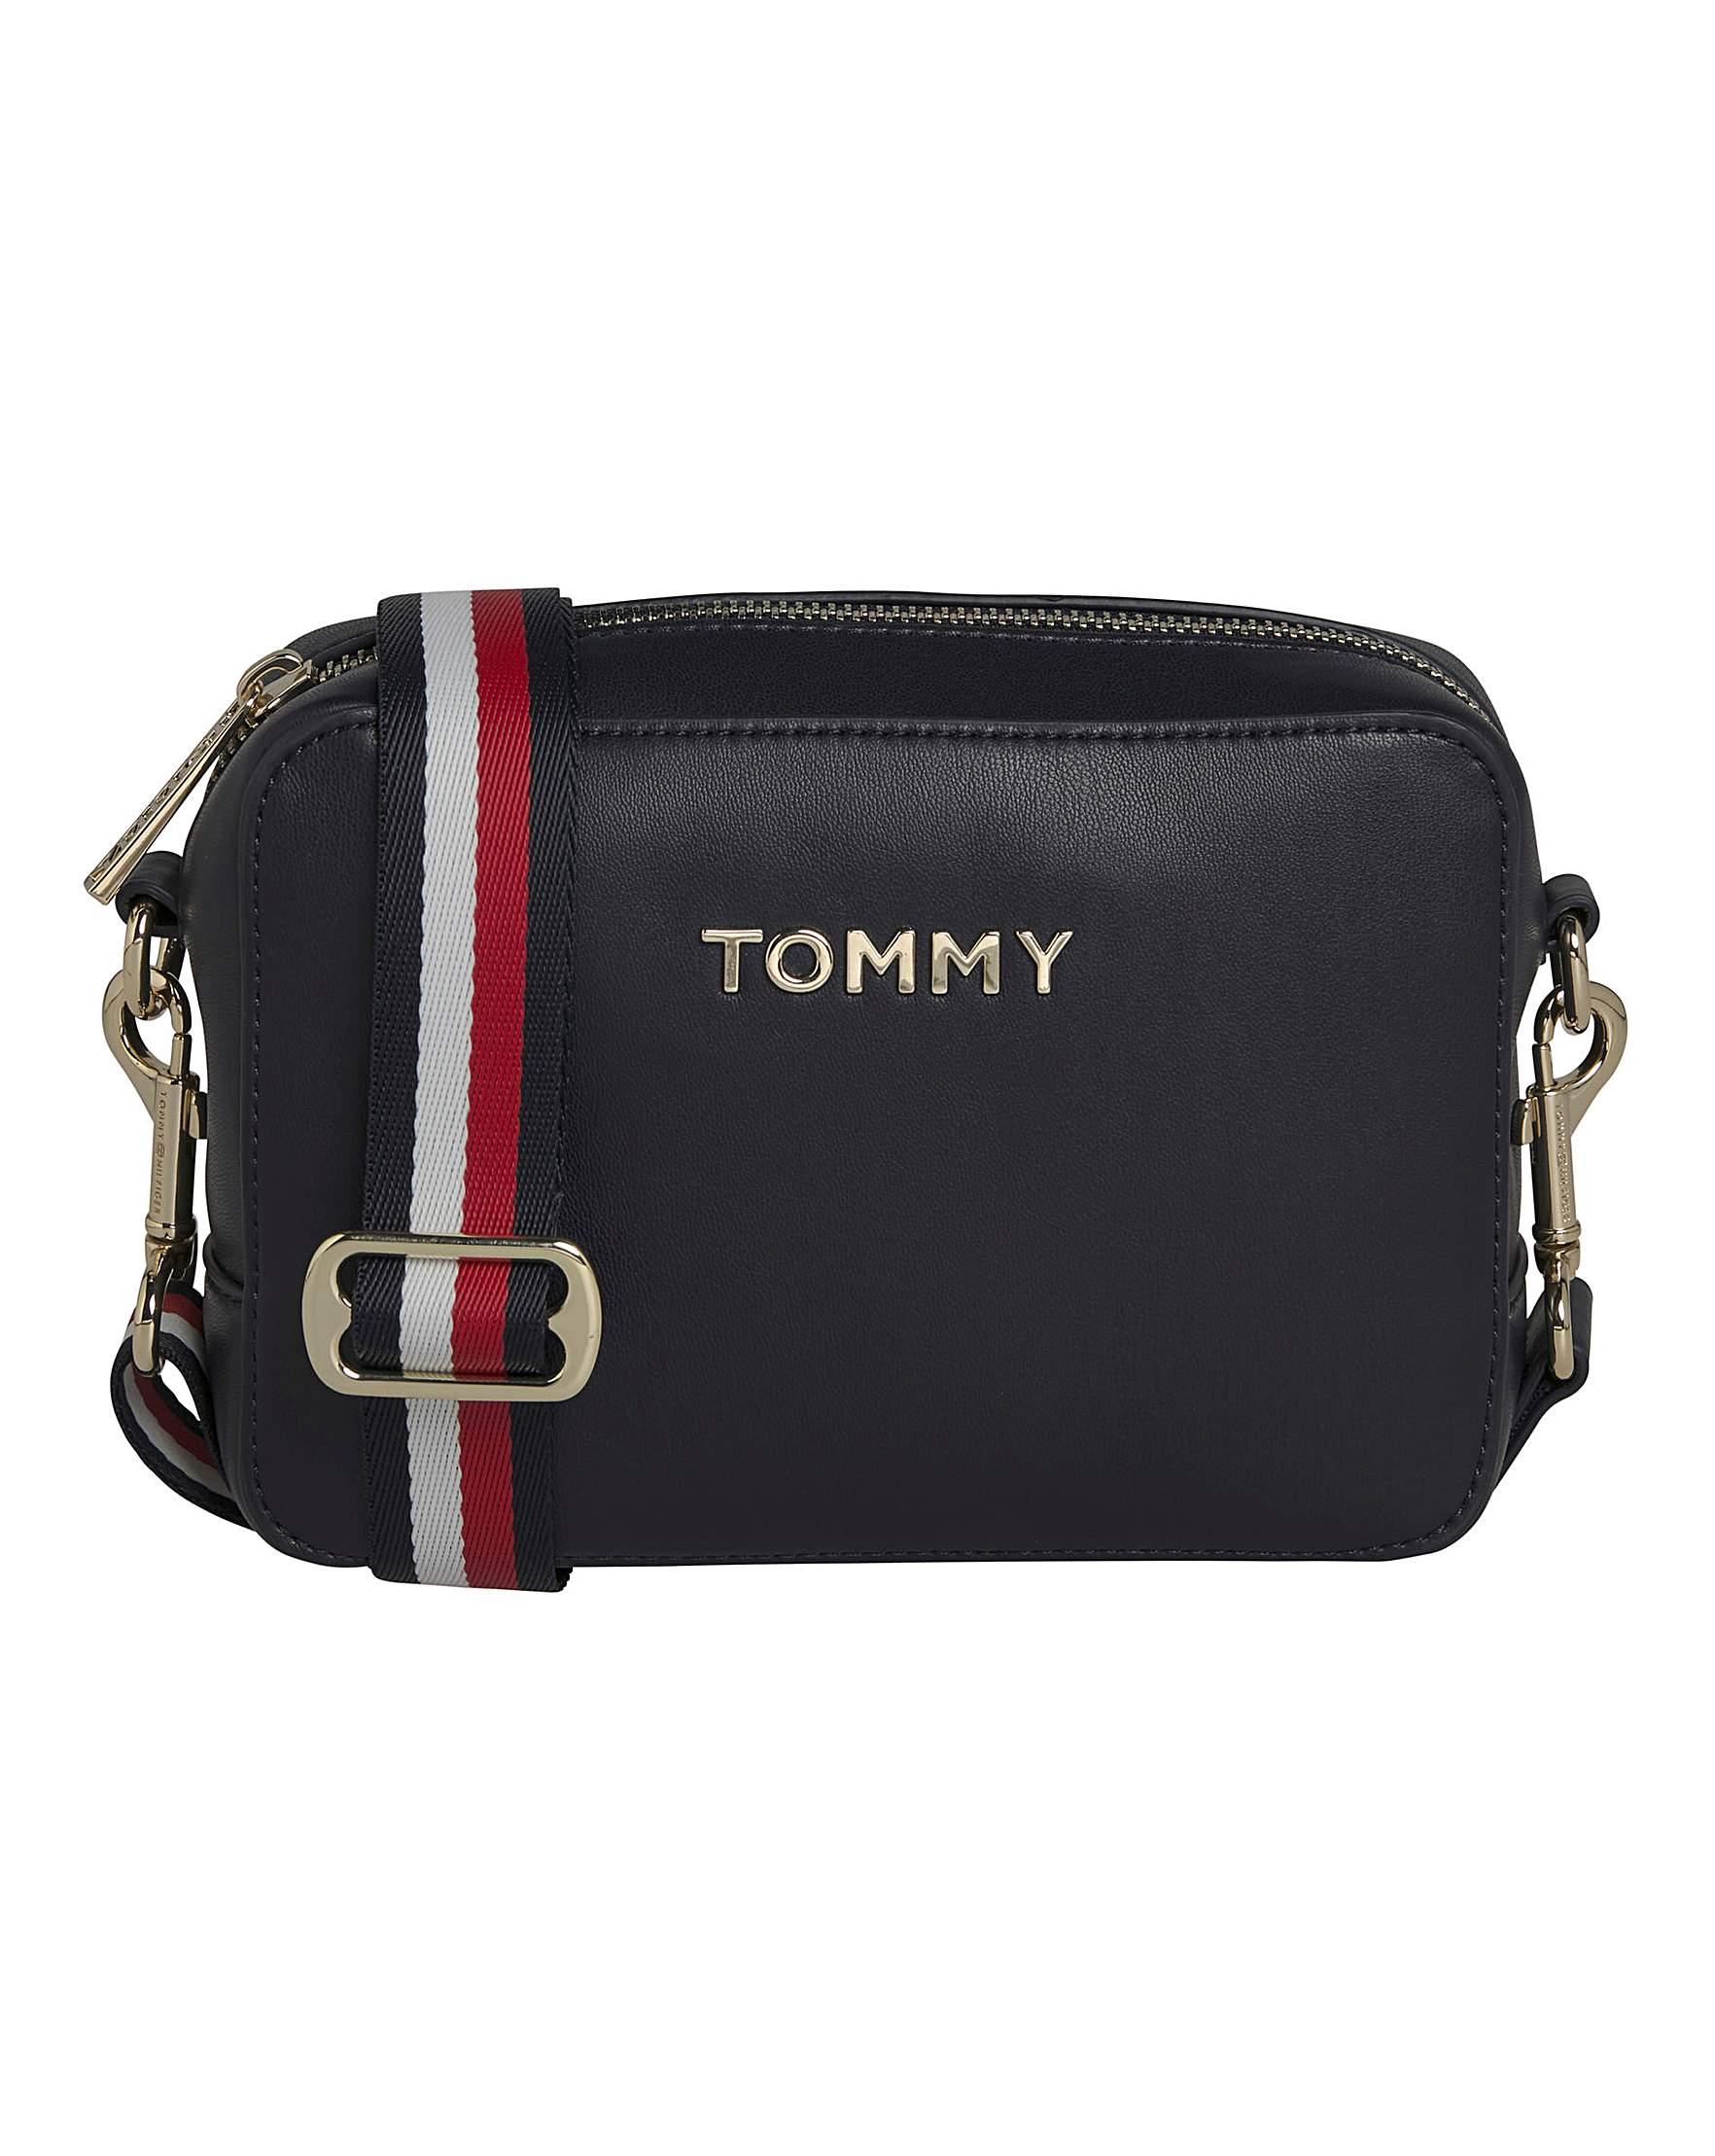 Tommy Hilfiger Icon Crossover Logo Bag in Navy (Blue) - Lyst